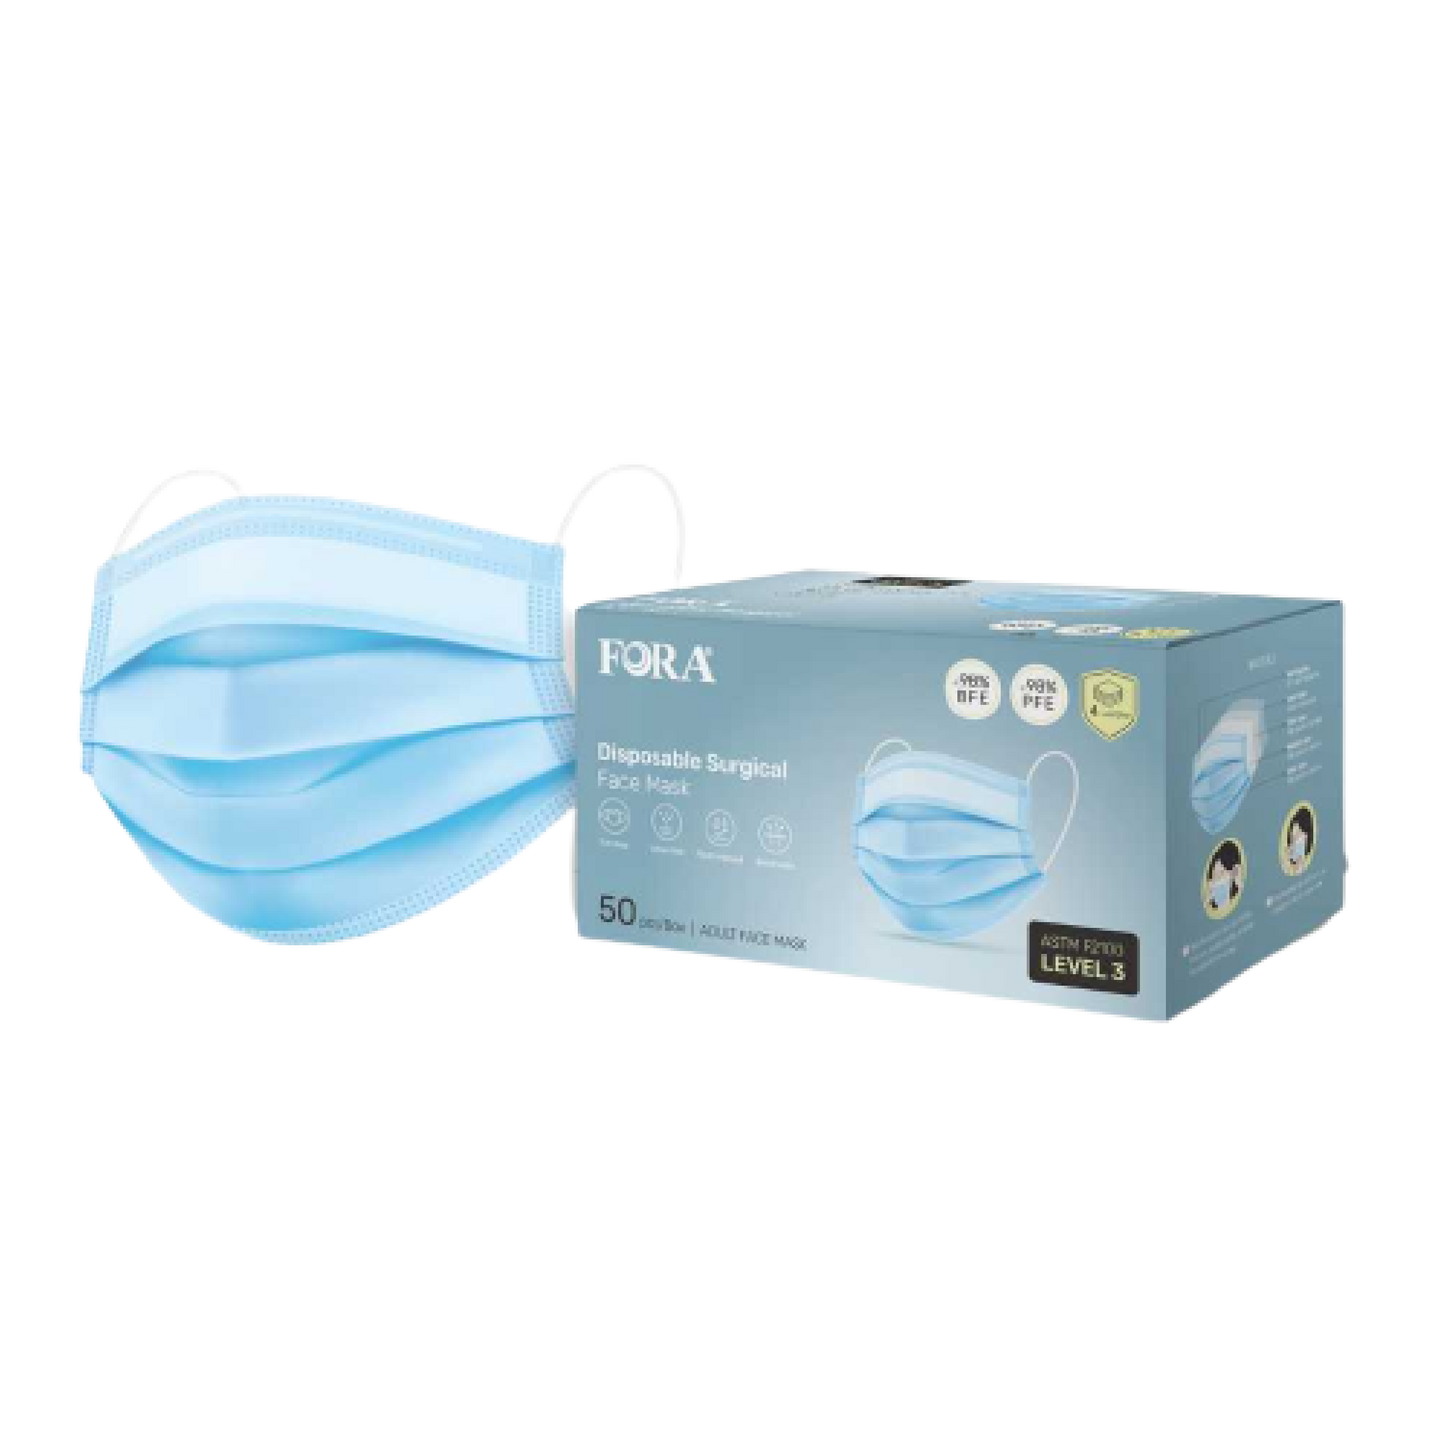 FORA 4-Ply ASTM Level 3 Medical Grade Disposable Mask (50 Pcs/box) Perfect for Surgical and Daily Use